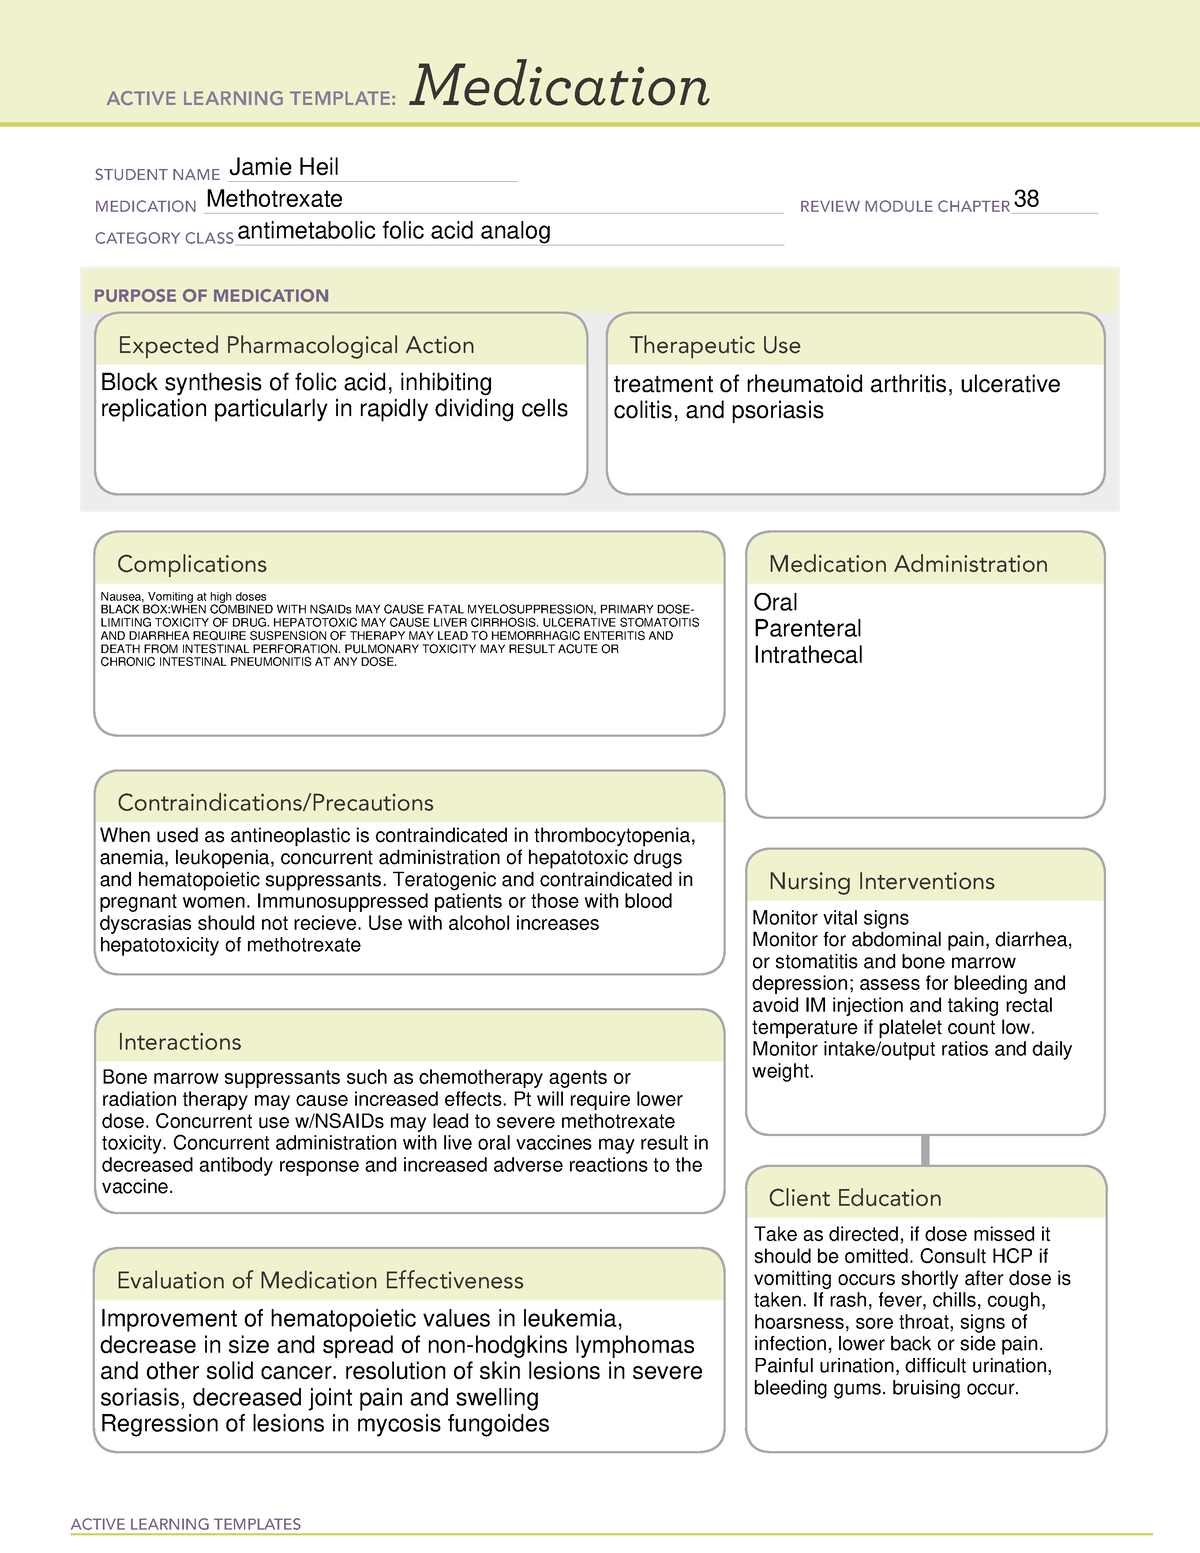 Methotrexate Medication Card ACTIVE LEARNING TEMPLATES Medication